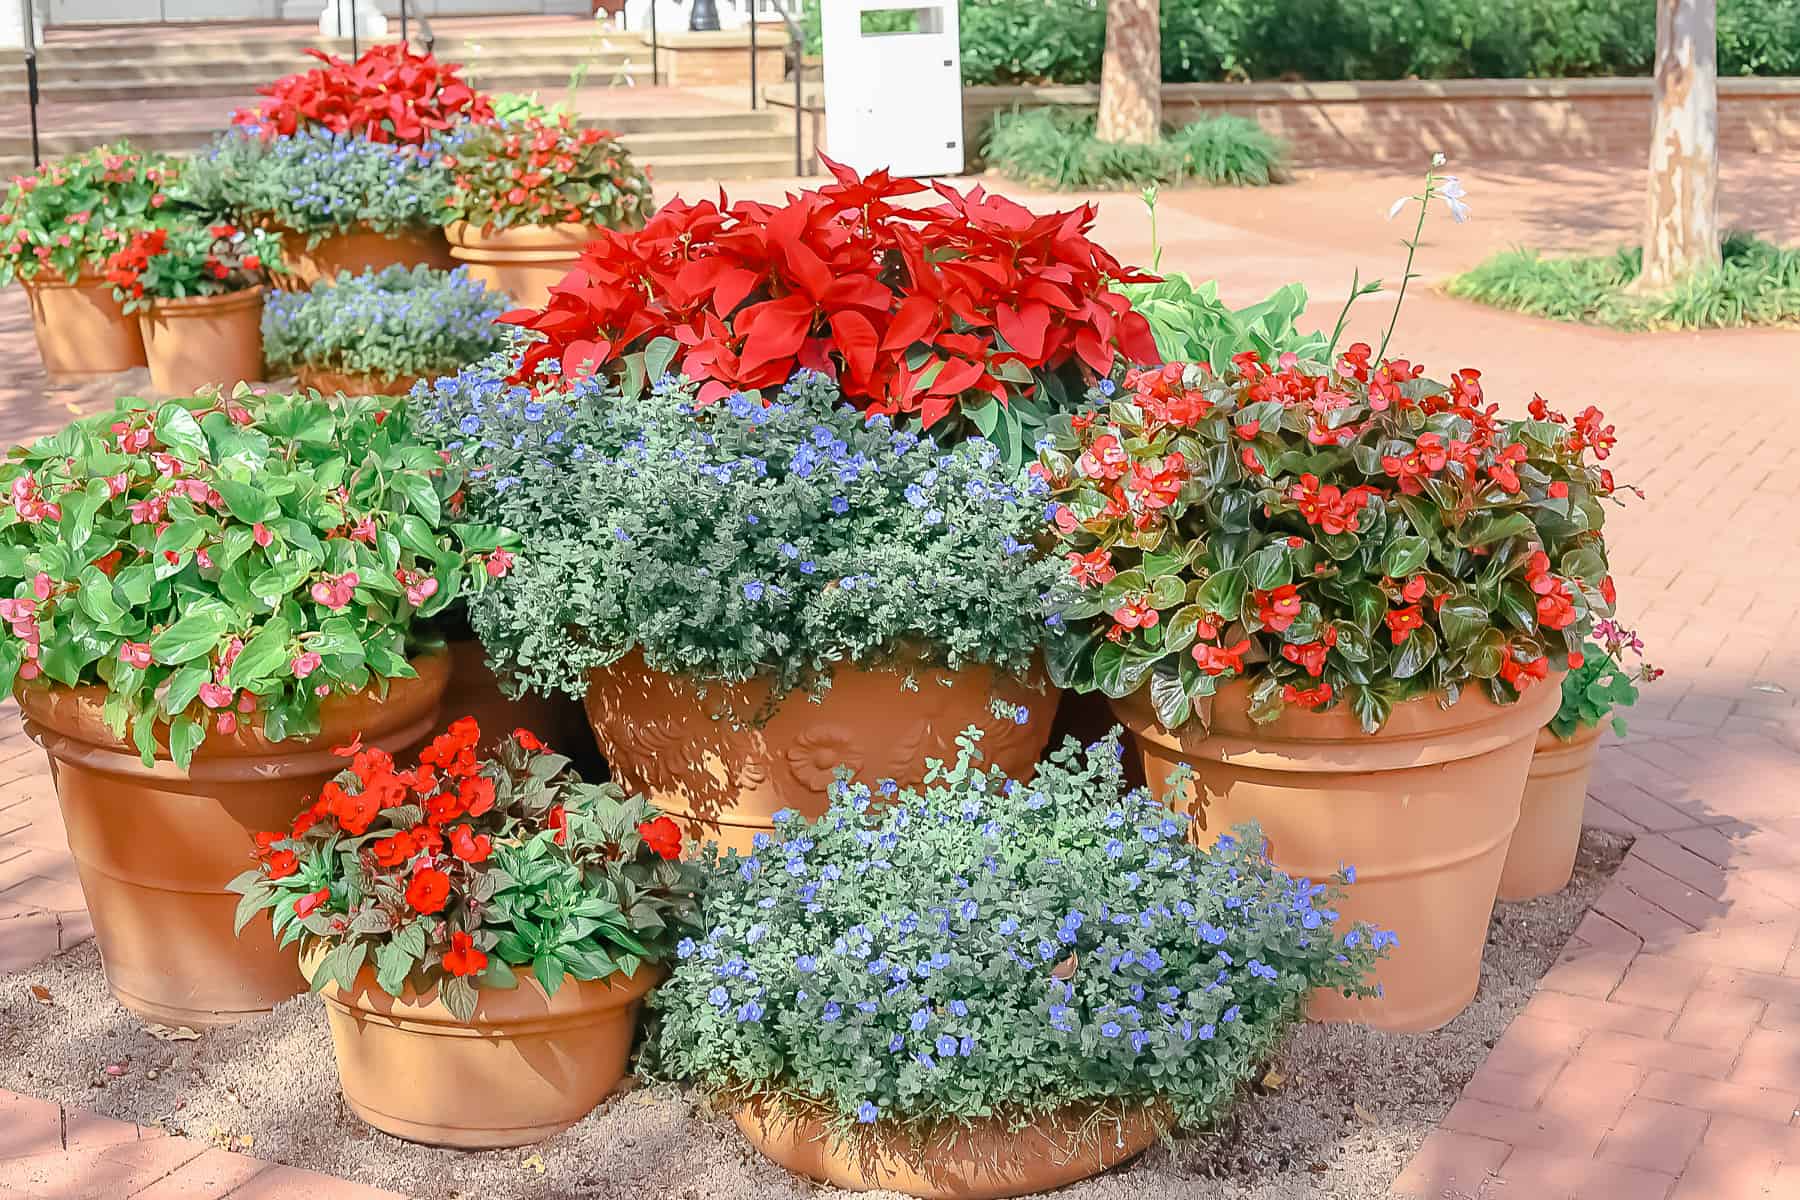 potted plants in festive holiday colors